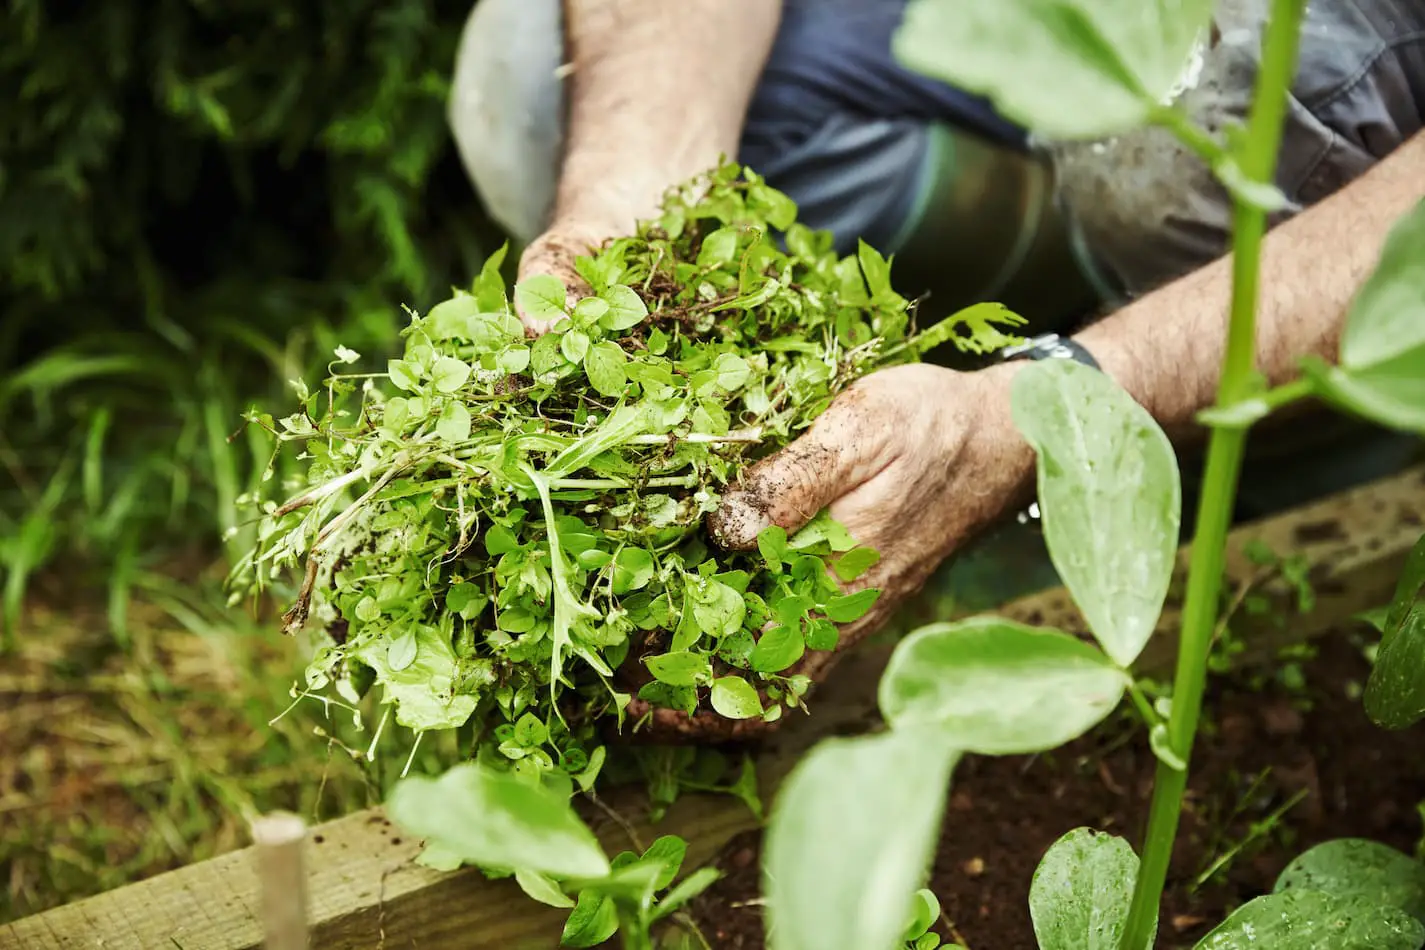 An image of a gardener holding a handful of weeds in the garden.